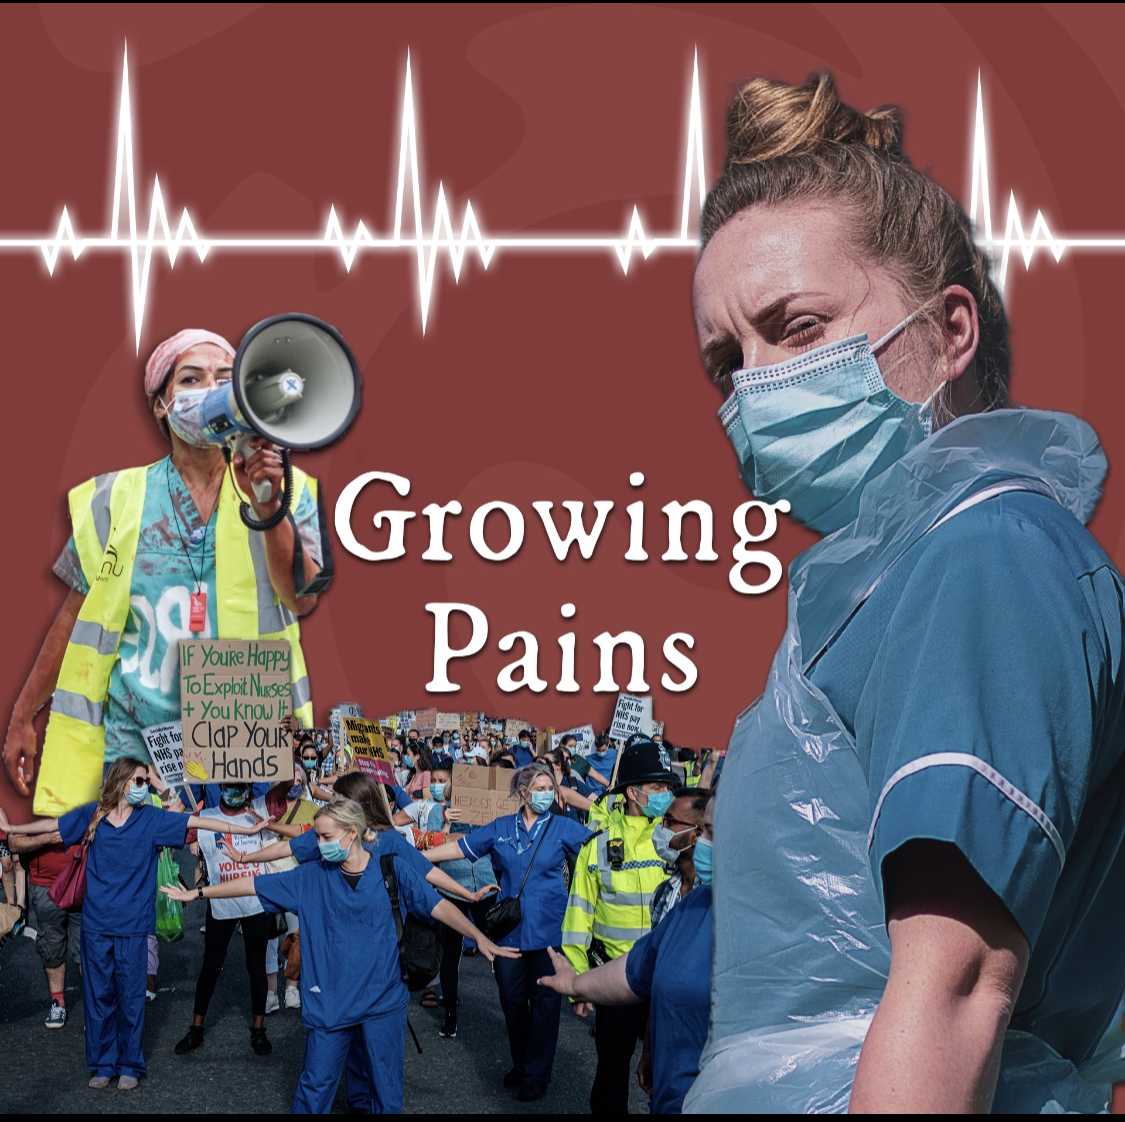 Growing+pains%3A+Madison+nurses+struggle+to+meet+increasing+industry+pressures+as+hospitals+solutions+fall+short